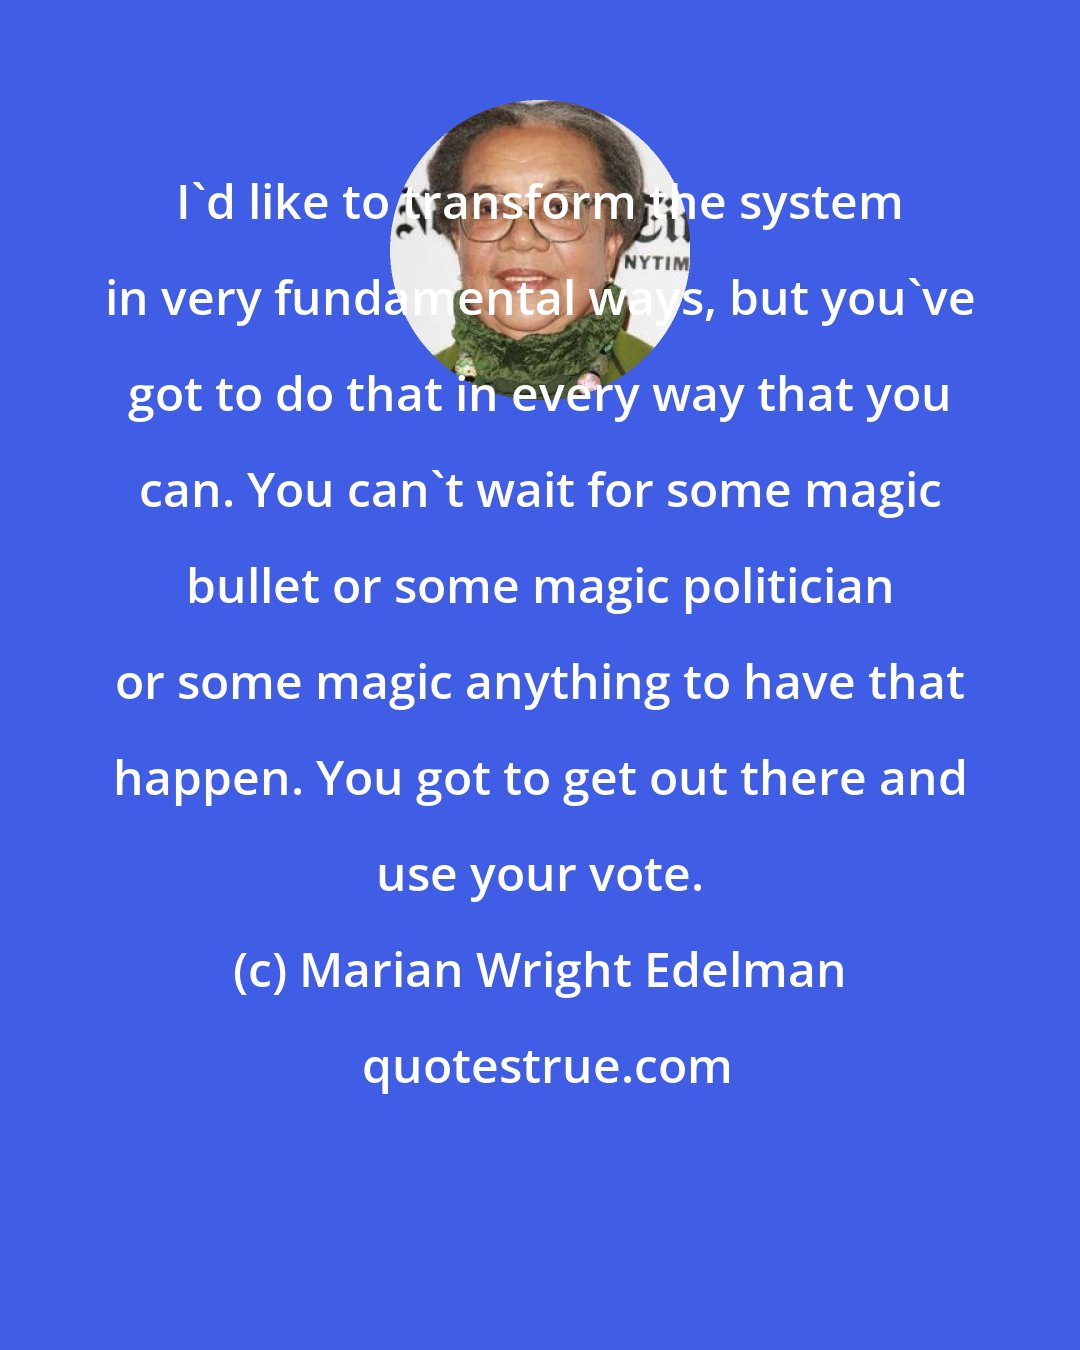 Marian Wright Edelman: I'd like to transform the system in very fundamental ways, but you've got to do that in every way that you can. You can't wait for some magic bullet or some magic politician or some magic anything to have that happen. You got to get out there and use your vote.